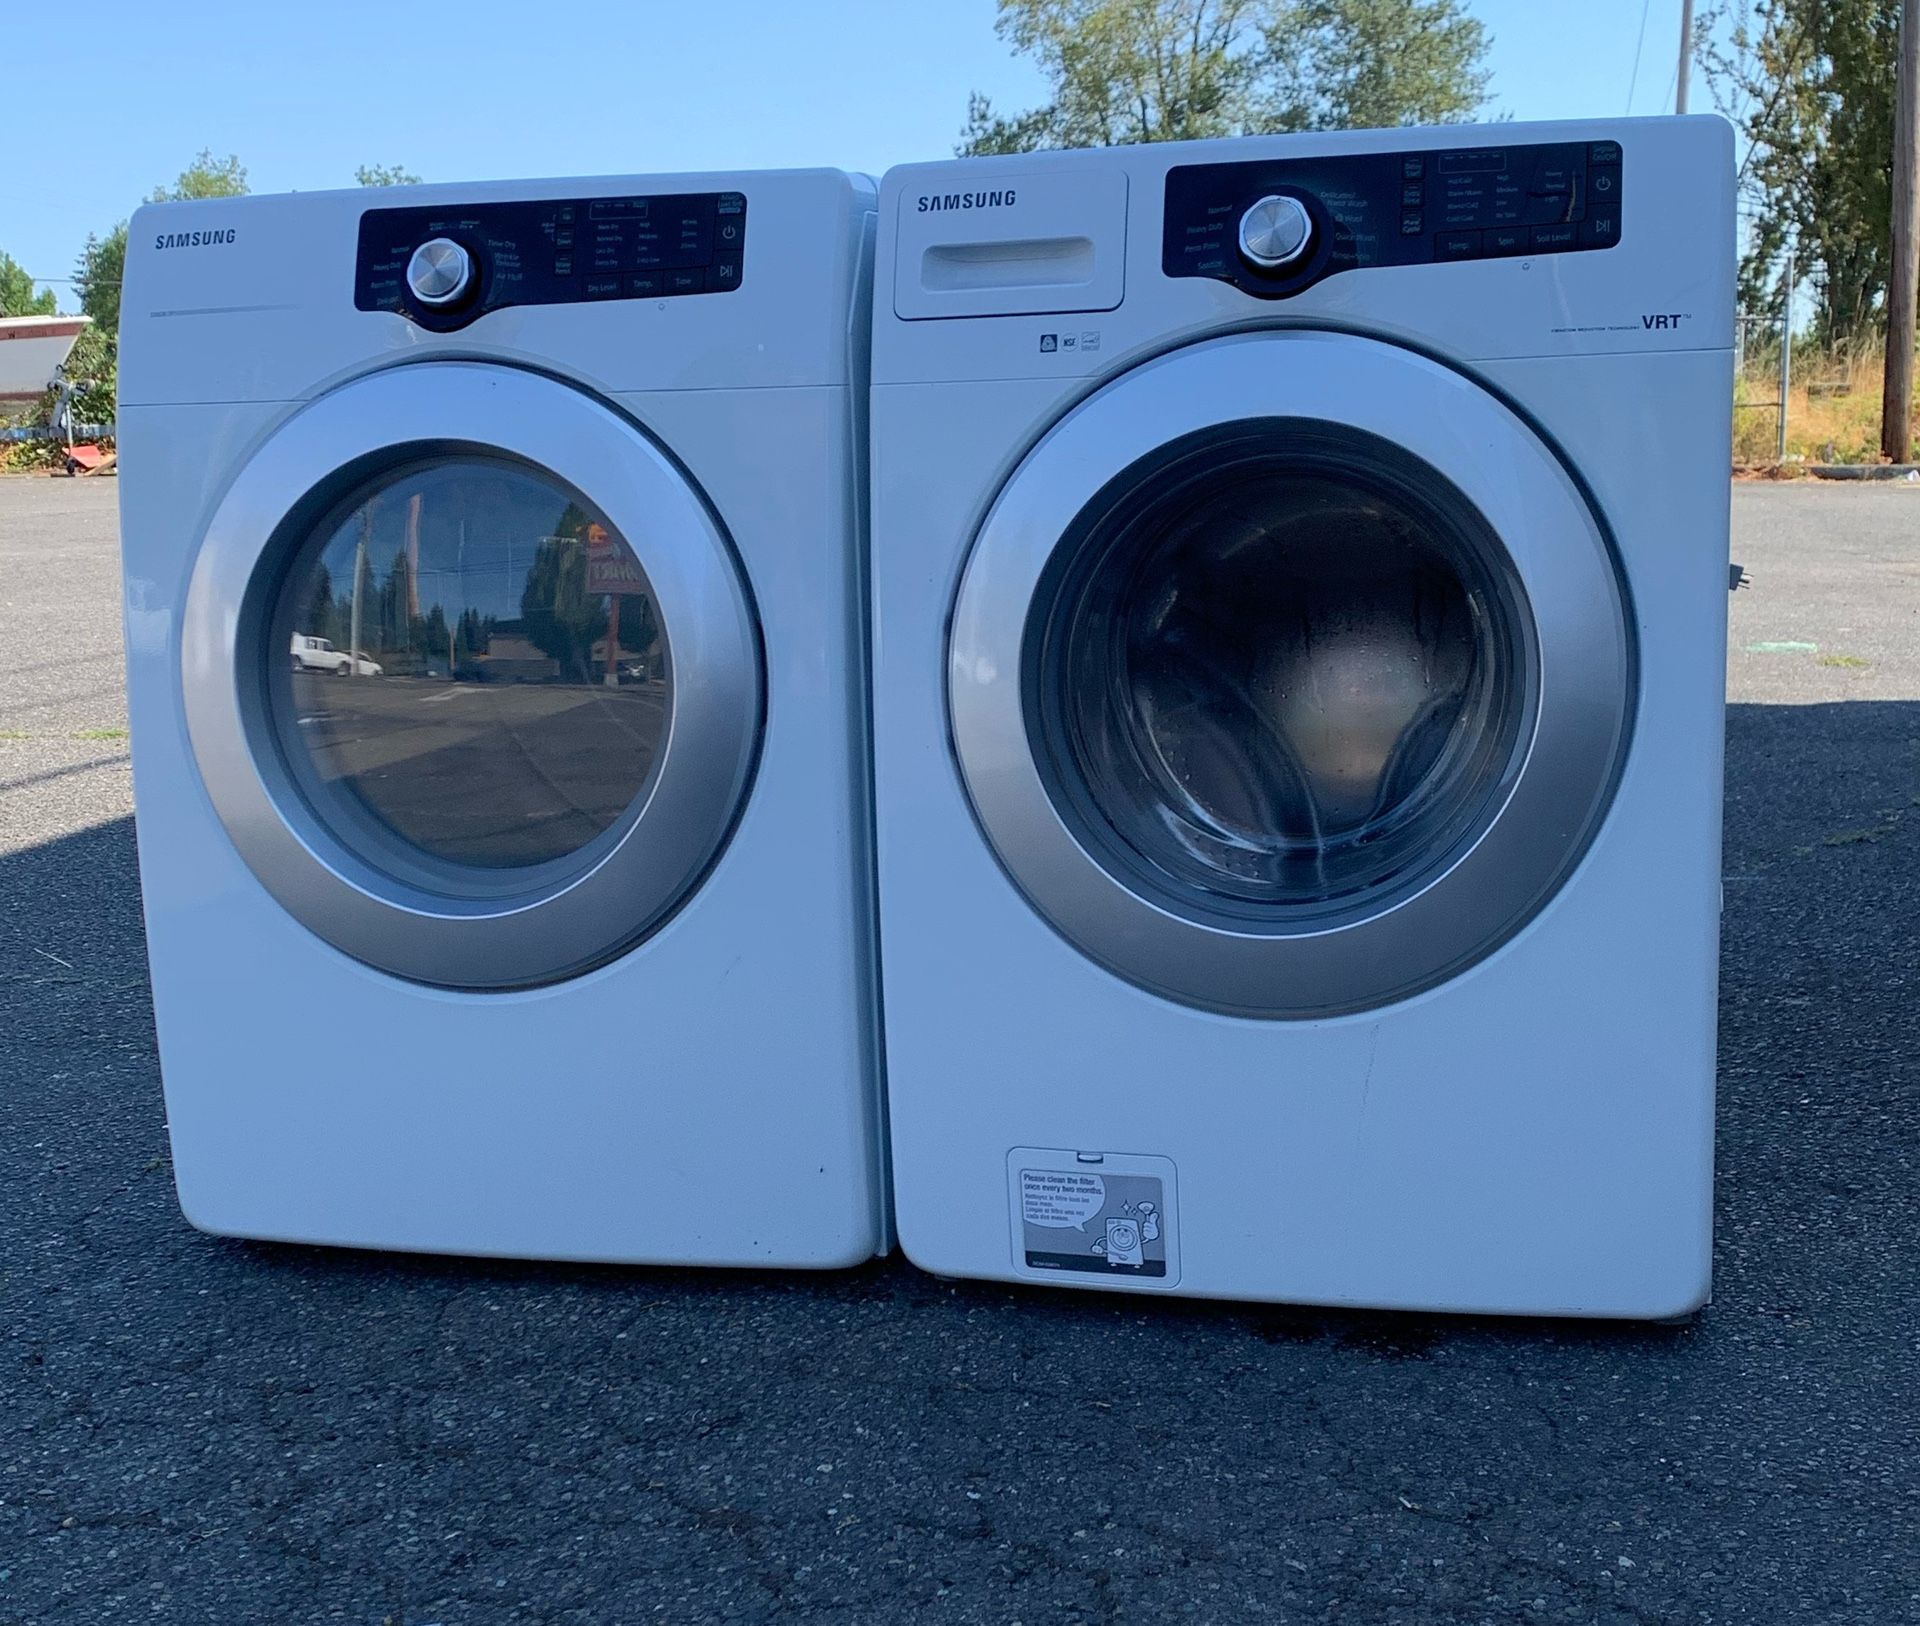 Samsung Washer And Dryer (electric Dryer ), Both Working Perfect With No Issues ,barely Used ,30 Day’s Warranty, Thanks.